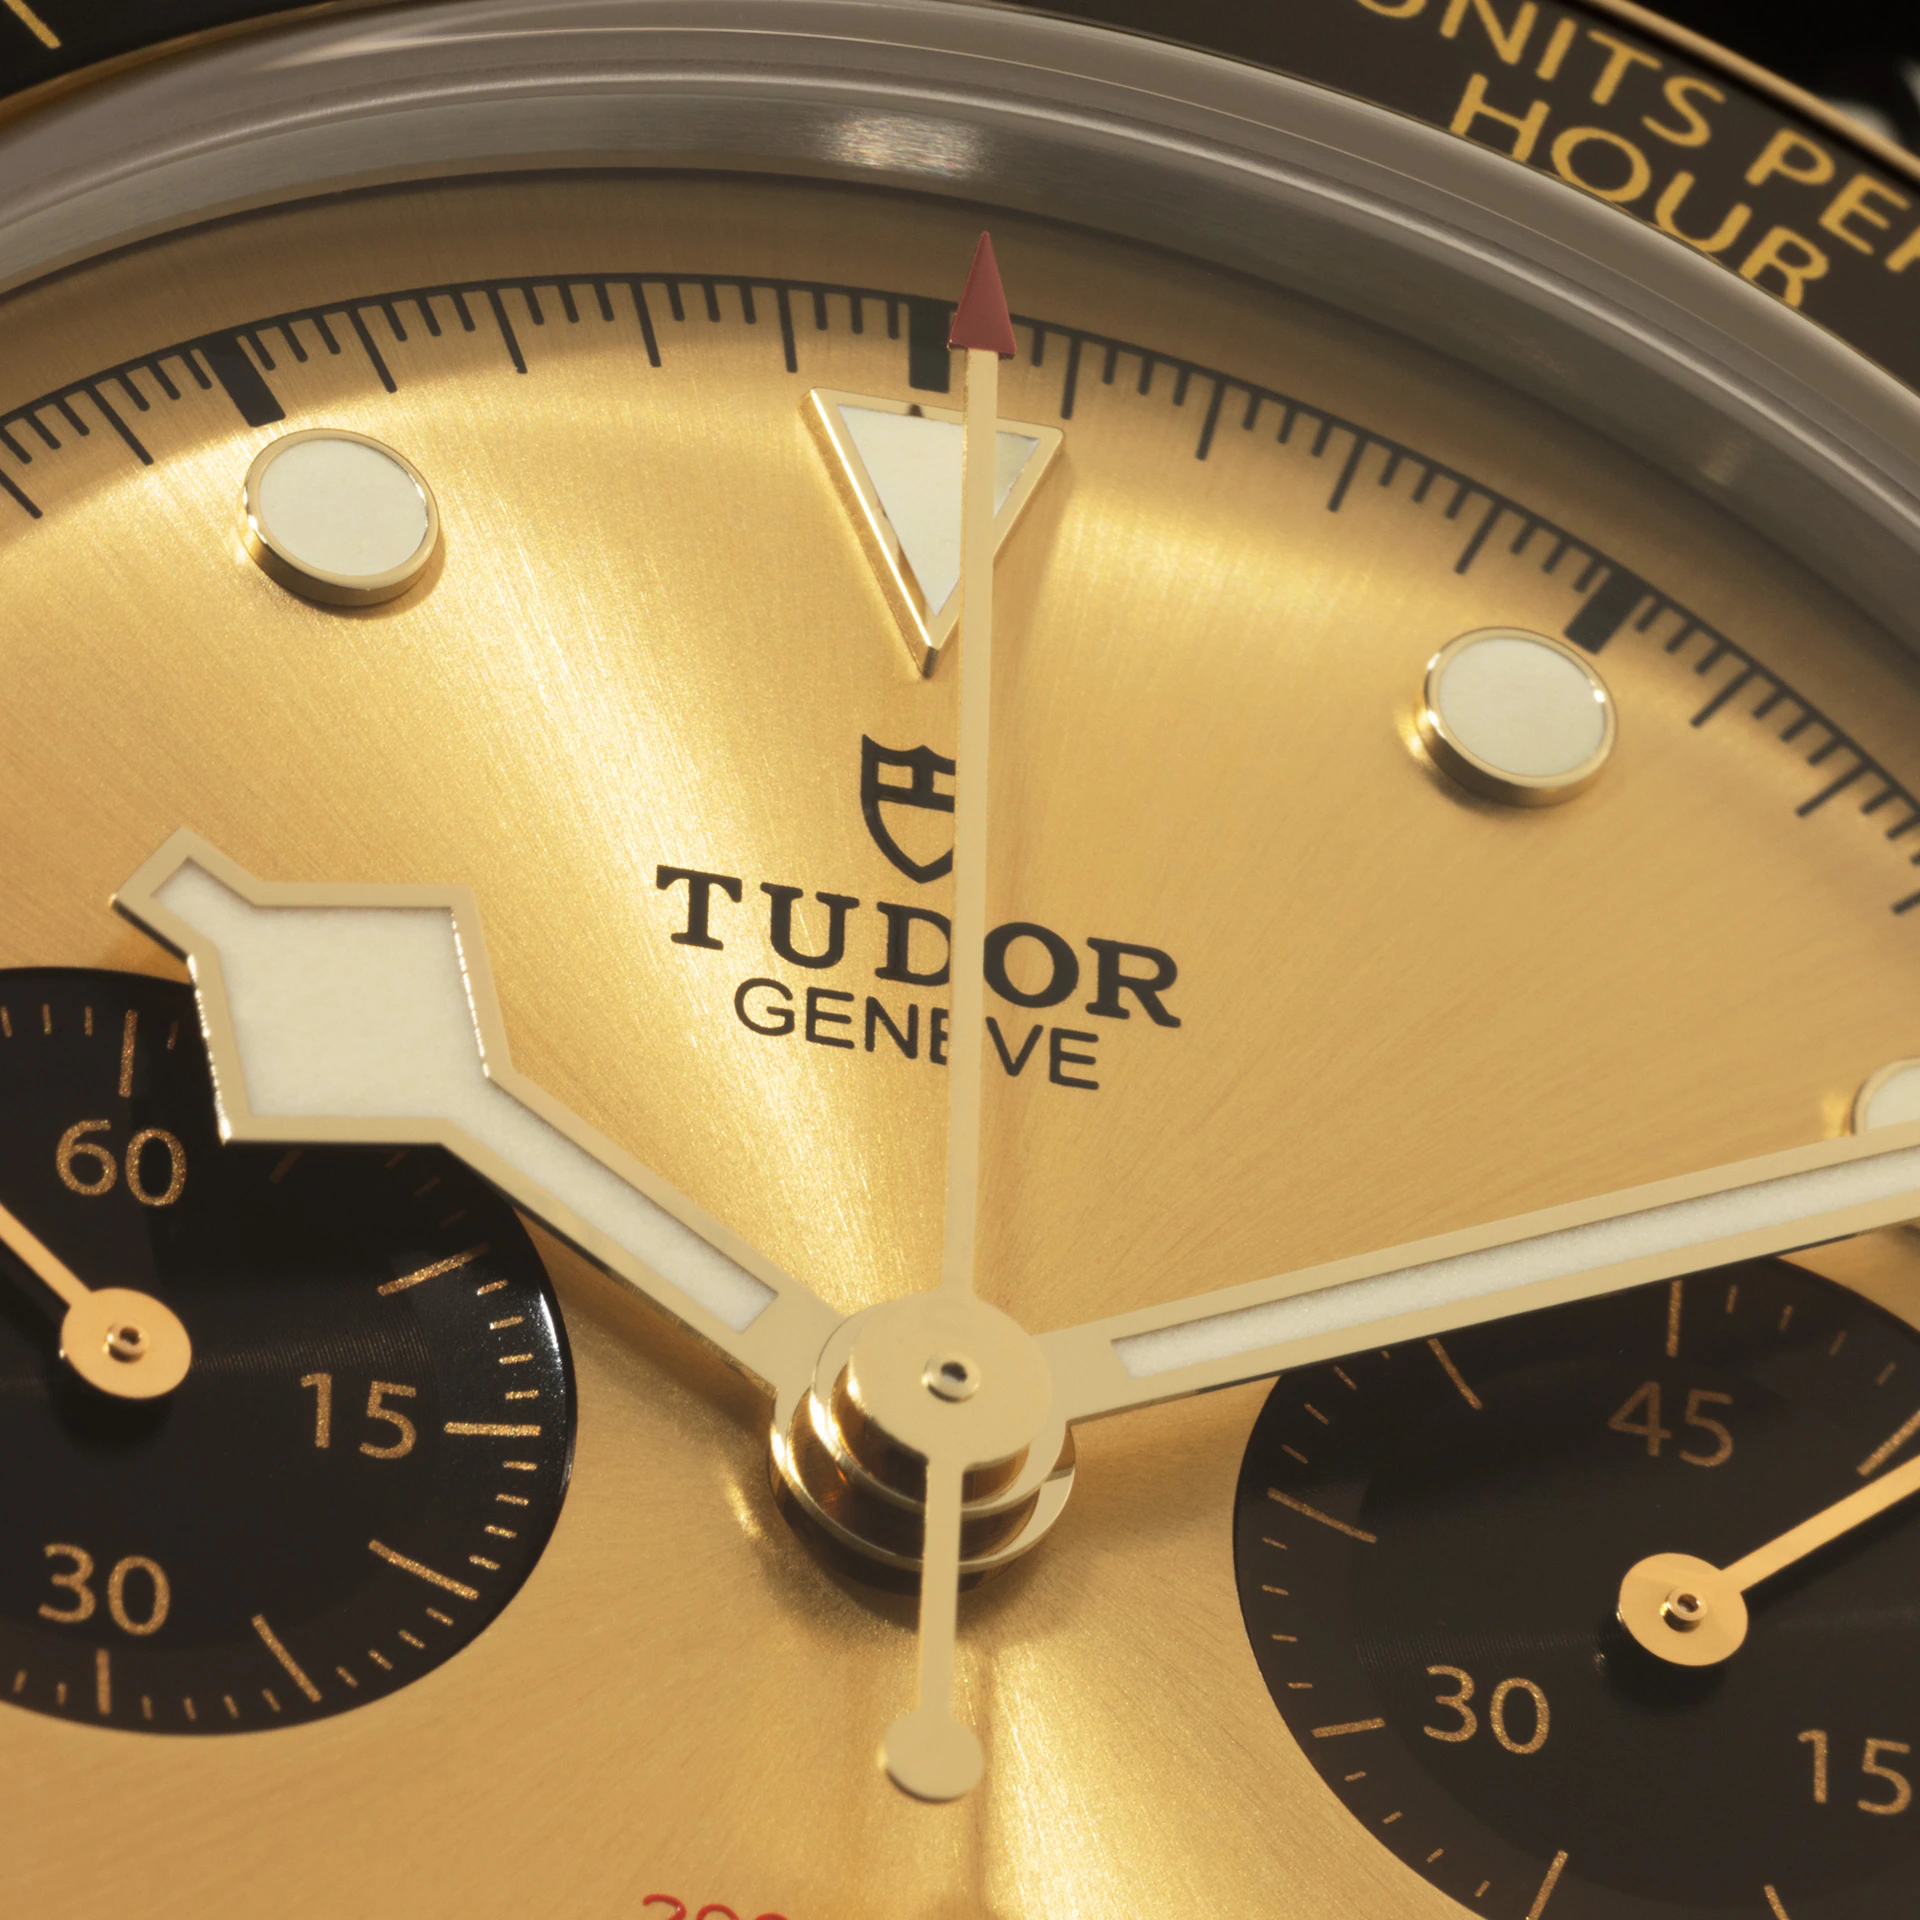 Tudor Black Bay Chrono S&G, 41mm, Stainless Steel and 18k Yellow Gold, Ref# M79363N-0008, Dial